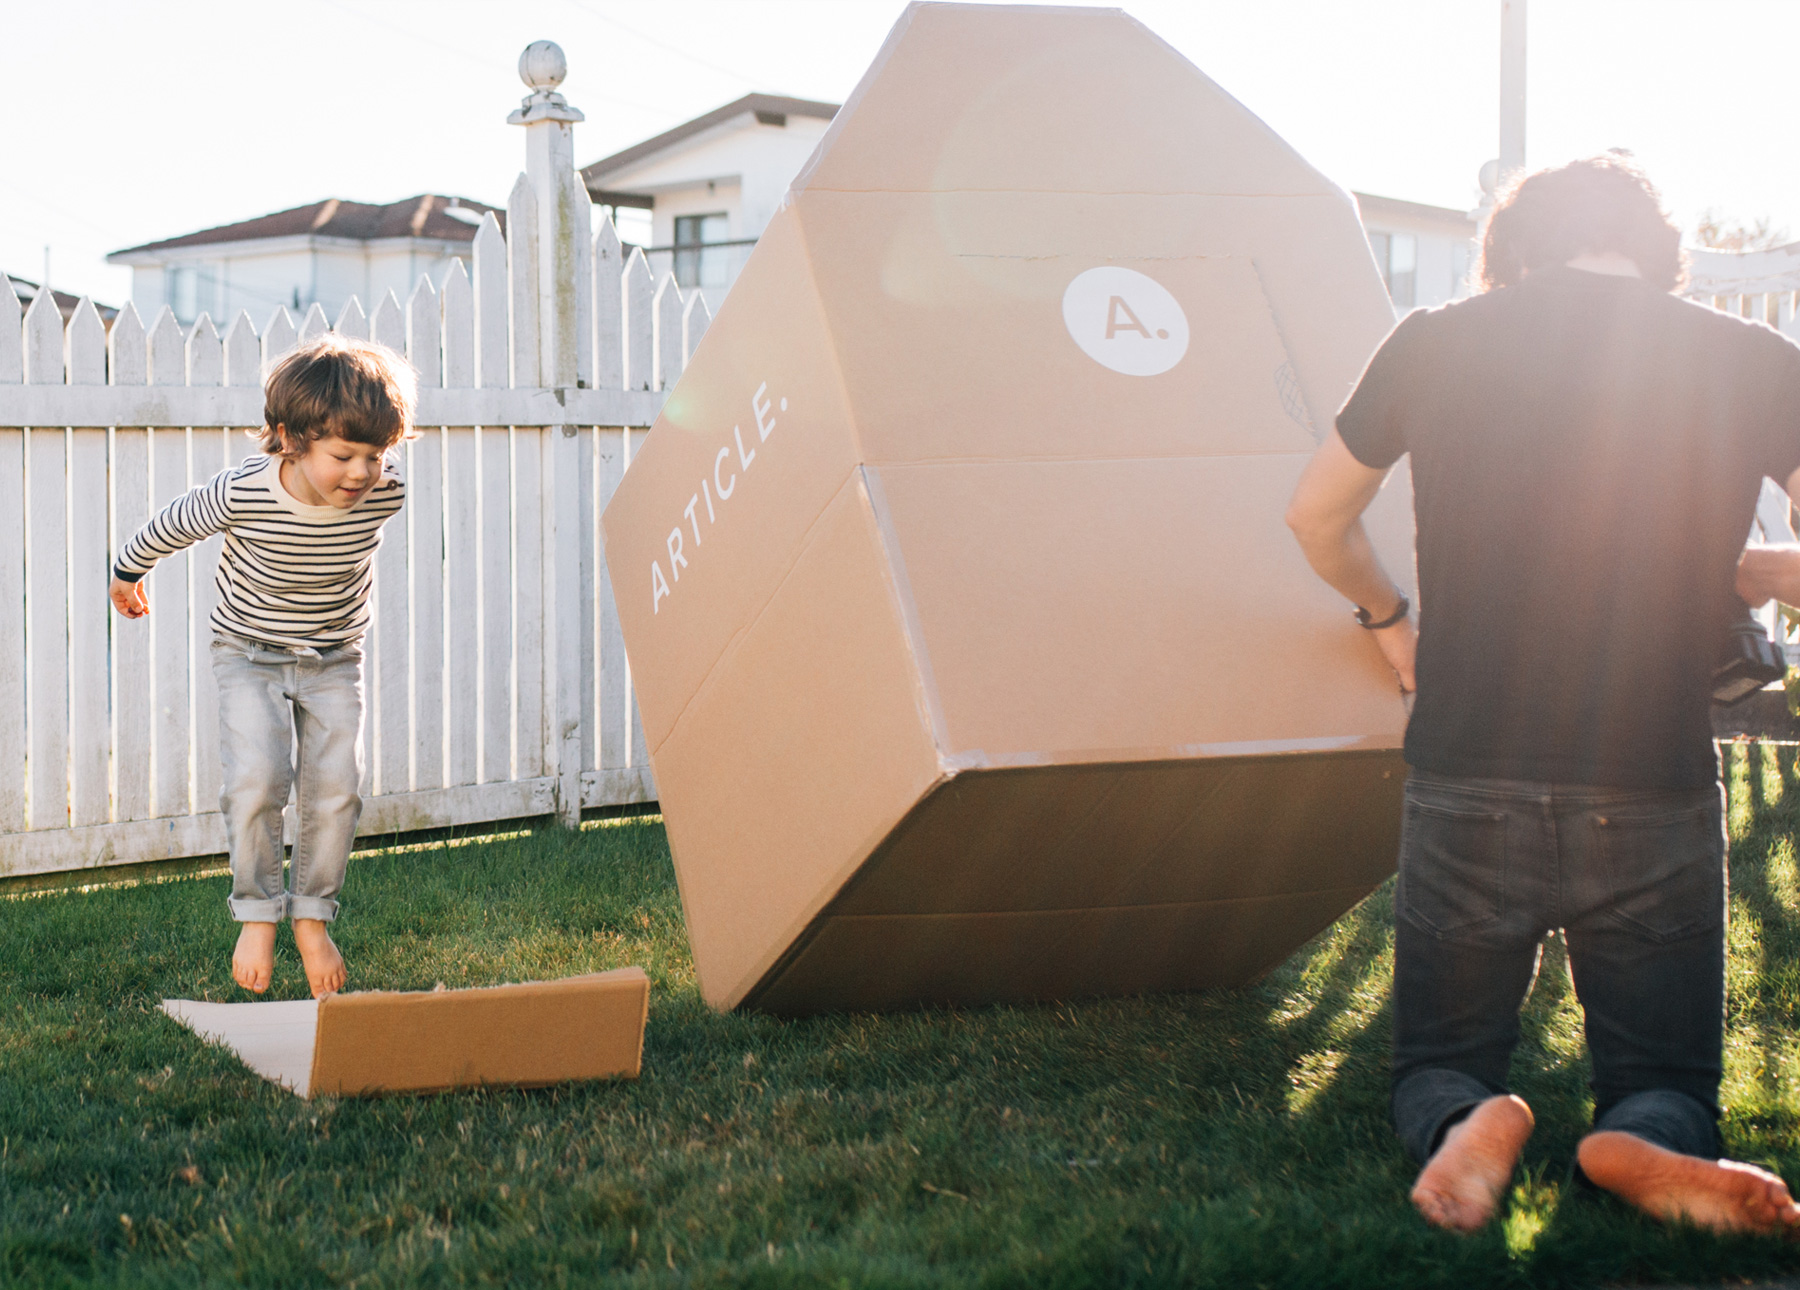 A father and son work together to create a cardboard box fort